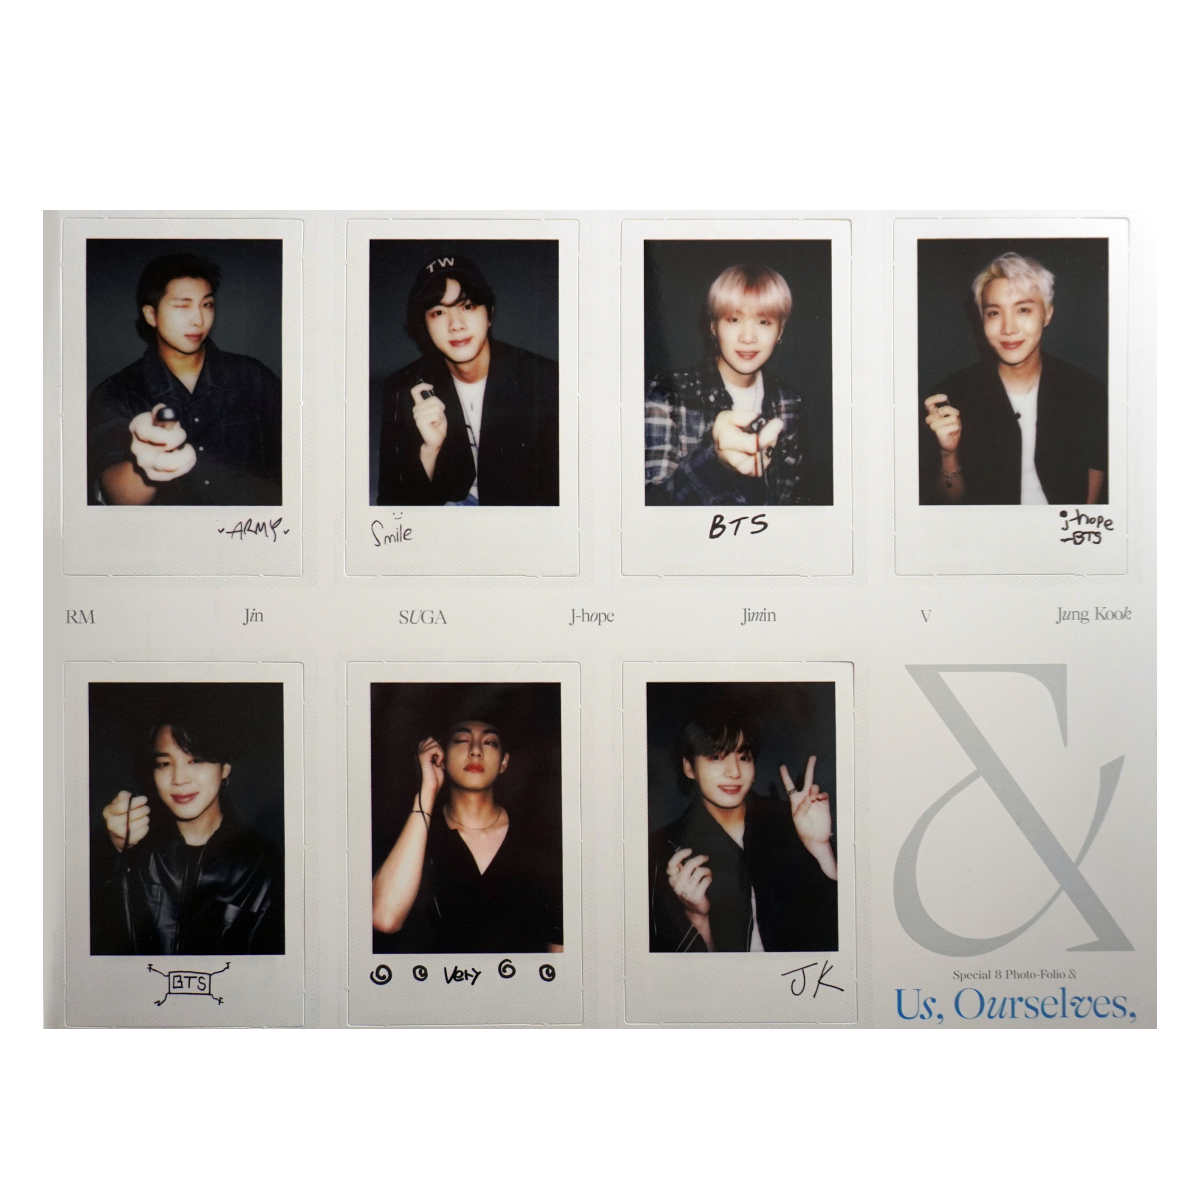 Special 8 Photo-Folio Us, Ourselves, and BTS 'WE' Polaroid Photos